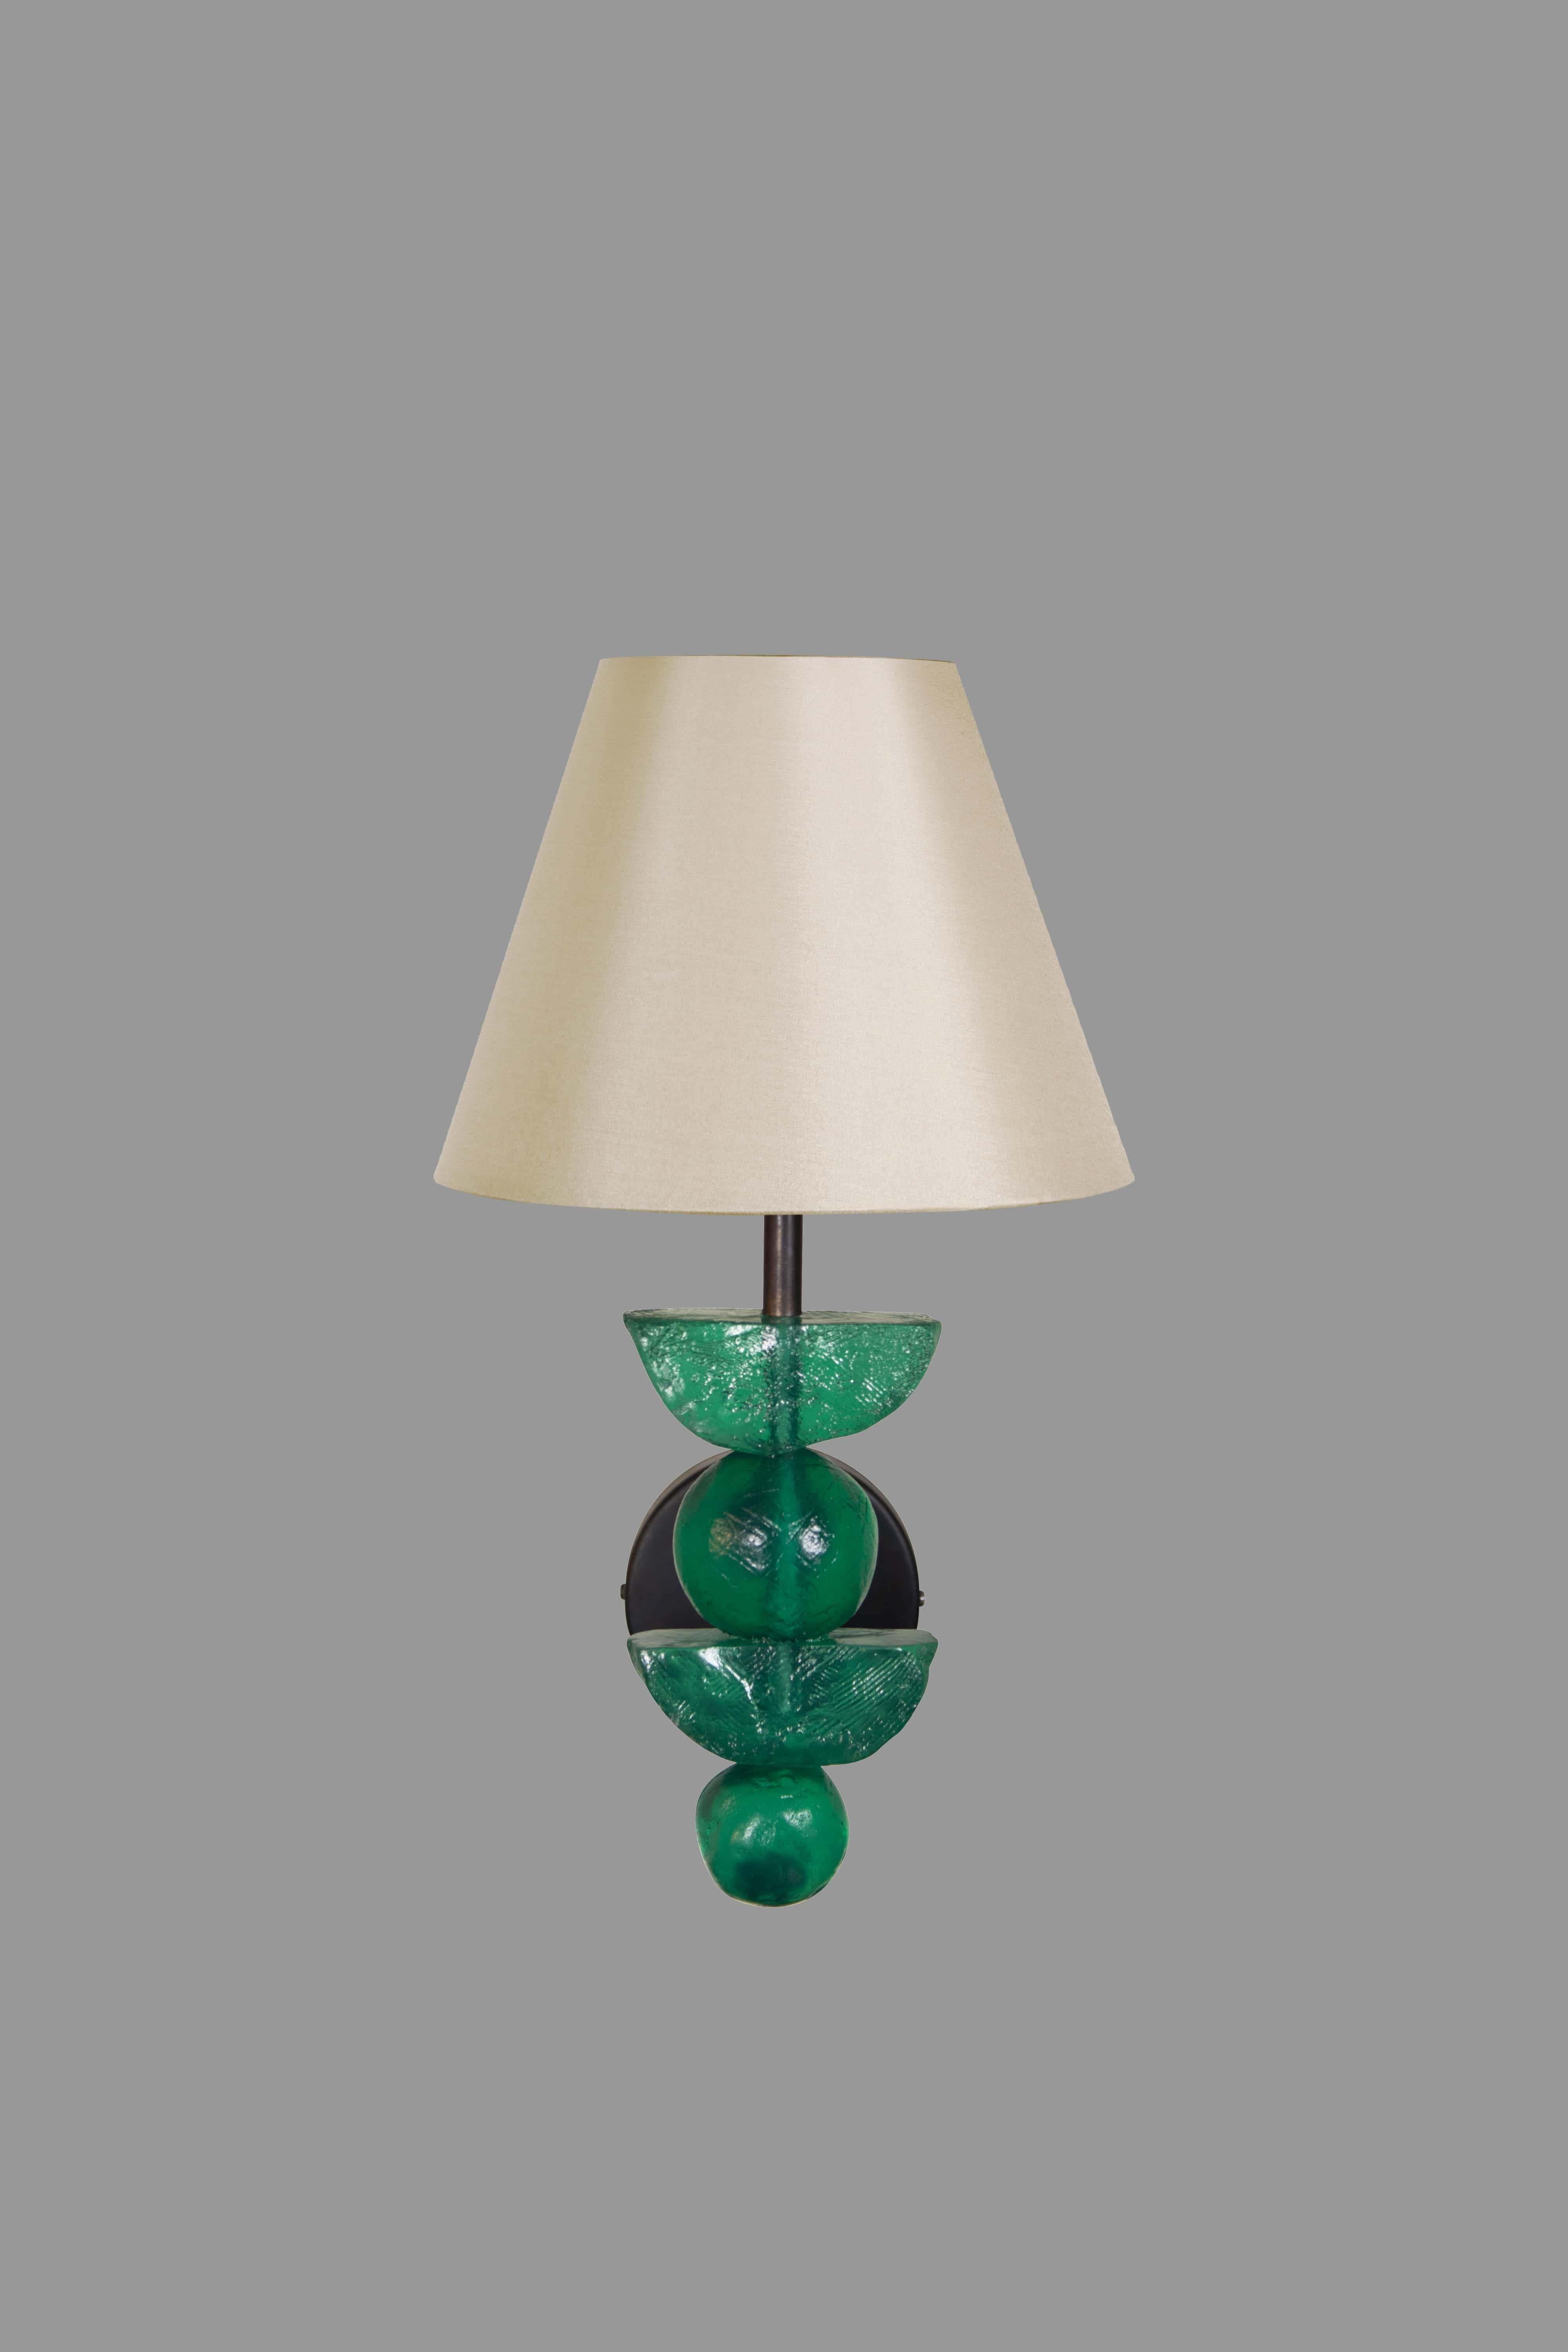 This Margit Wittig wall light with emerald resin hand-sculpted components is cast in her London-based studio.
The hand-patinated gold finish enhances the organic surface texture, a brass detail adds interest to this object of art which provides a